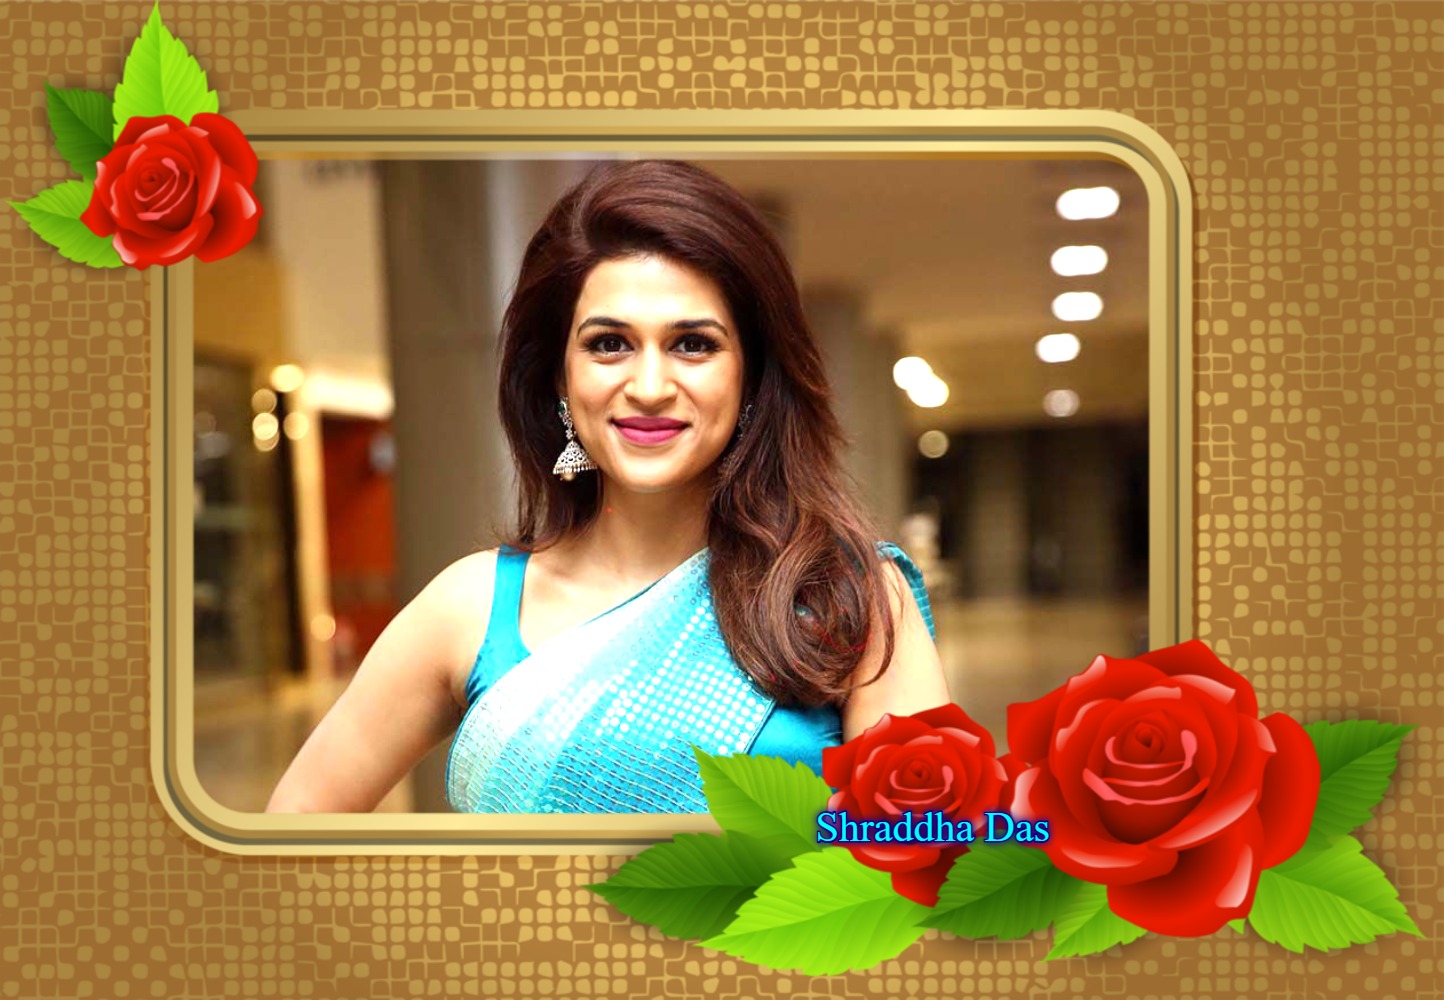 You are currently viewing “Shraddha Das – Inching Her Way To Superstardom”